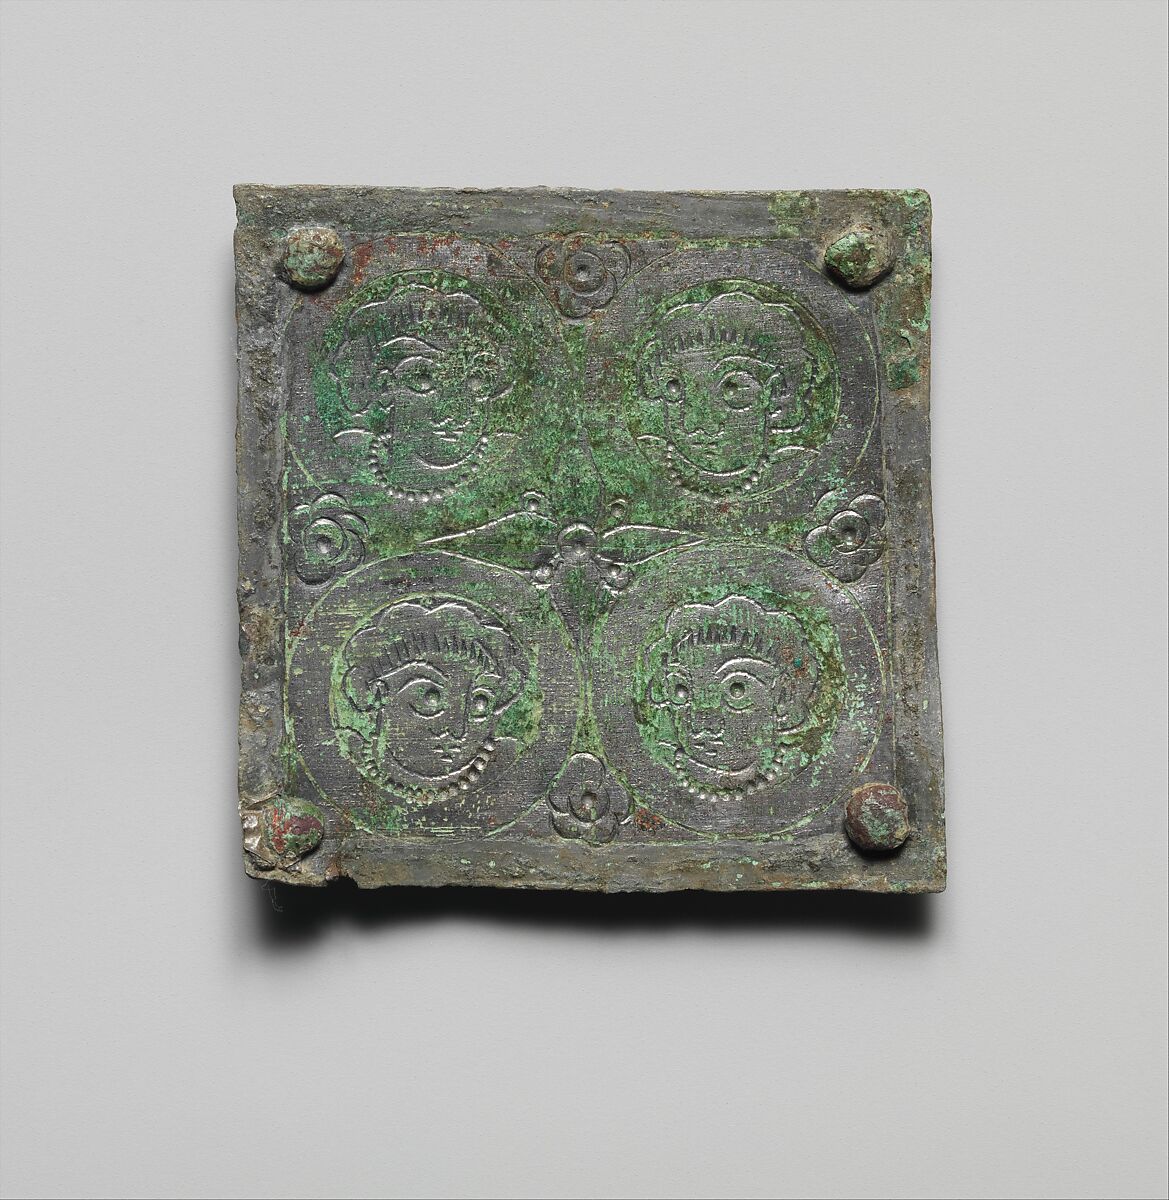 Tinned-Copper Plaque with a Personification, Tinned copper, Byzantine 